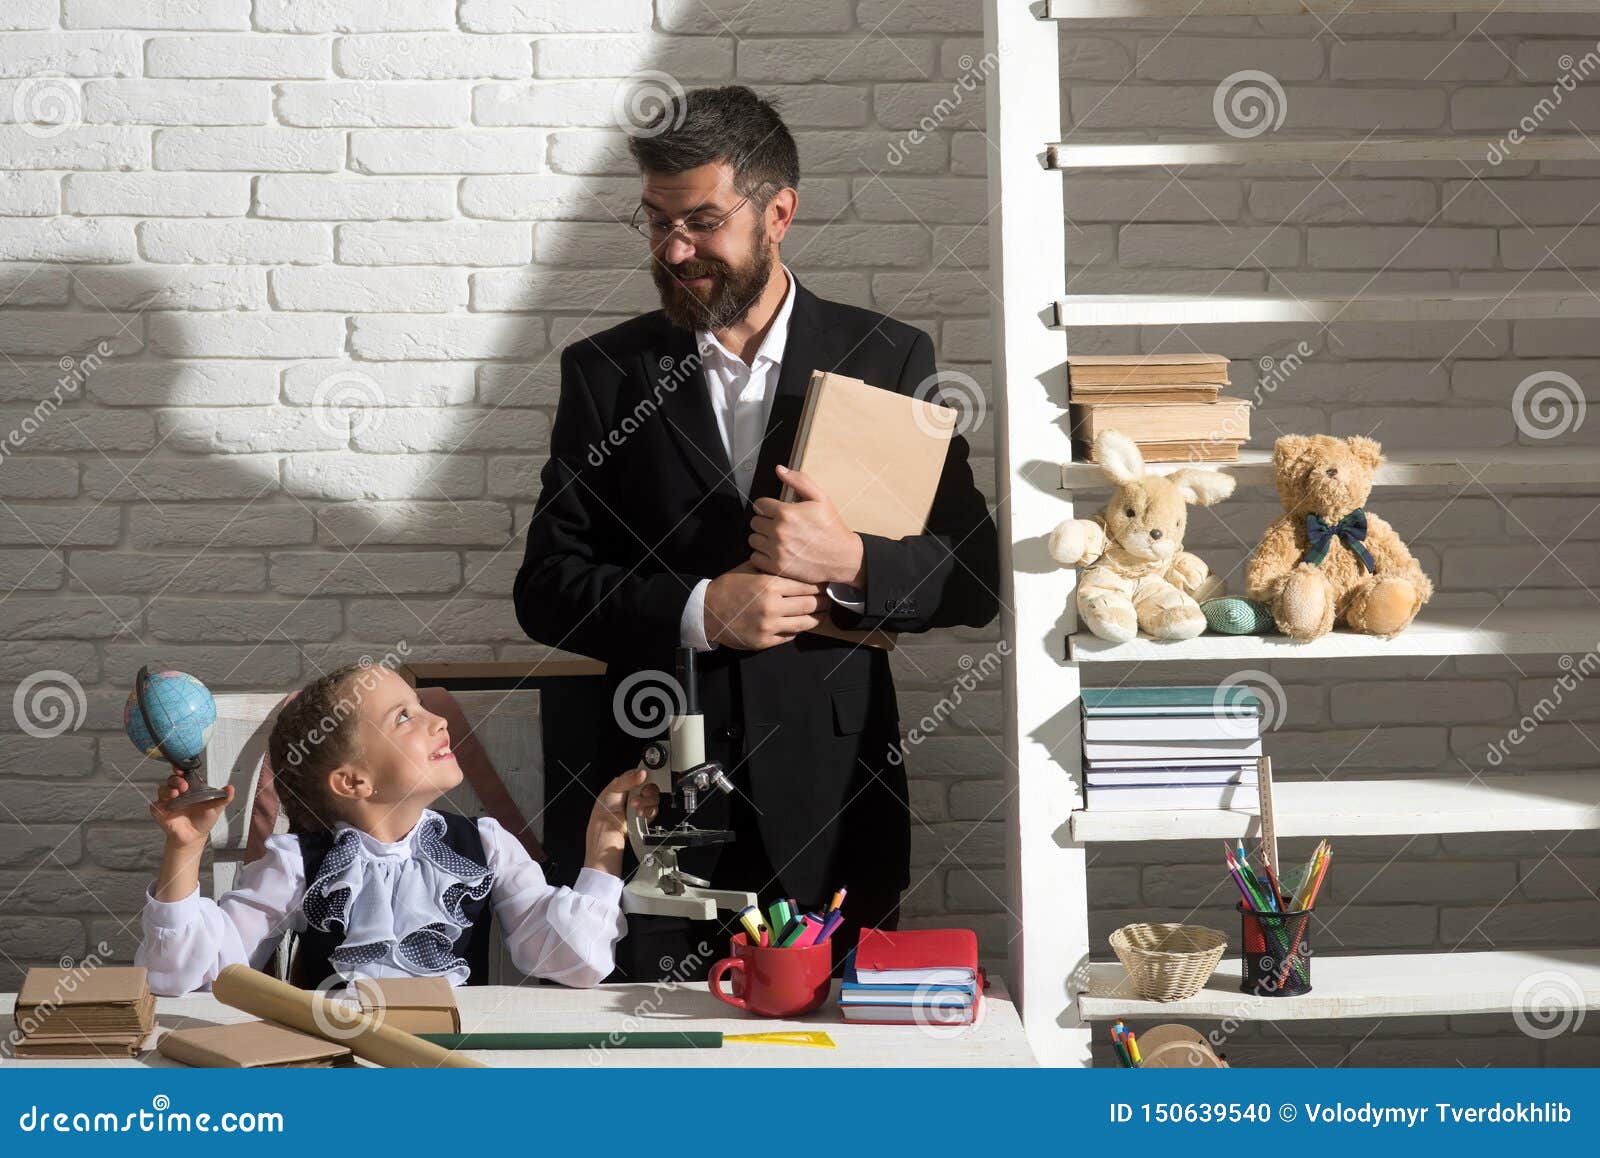 Kid And Man At Desk With School Items Stock Photo Image Of Braid